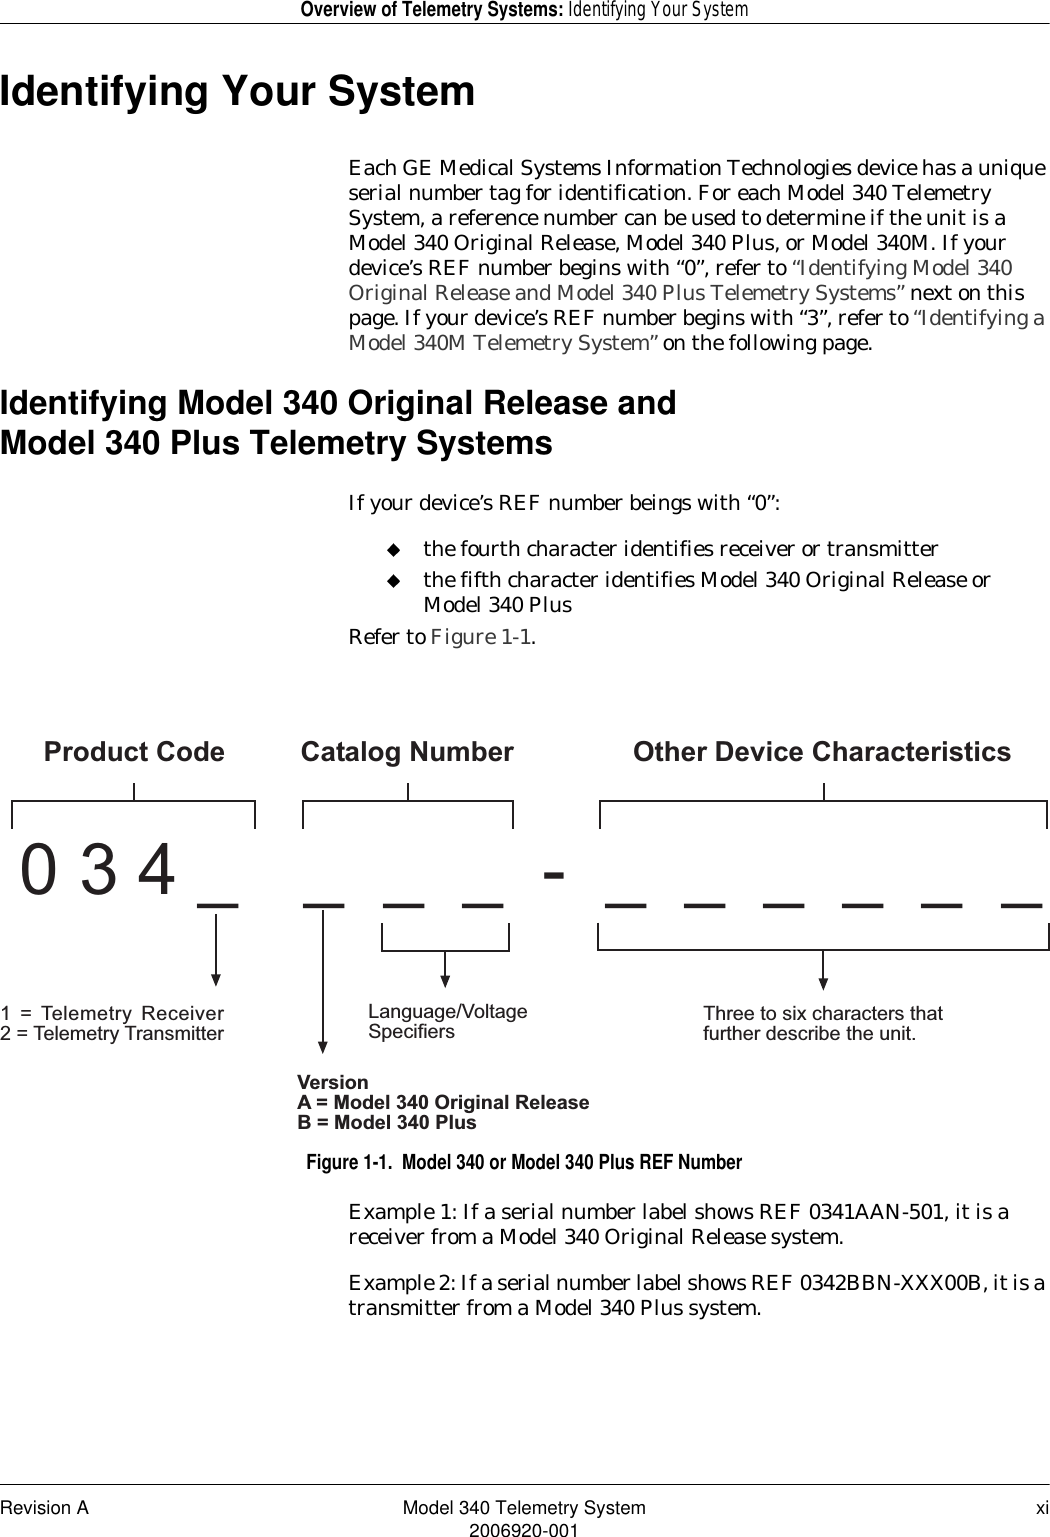 Revision A Model 340 Telemetry System xi2006920-001Overview of Telemetry Systems: Identifying Your SystemIdentifying Your SystemEach GE Medical Systems Information Technologies device has a unique serial number tag for identification. For each Model 340 Telemetry System, a reference number can be used to determine if the unit is a Model 340 Original Release, Model 340 Plus, or Model 340M. If your device’s REF number begins with “0”, refer to “Identifying Model 340 Original Release and Model 340 Plus Telemetry Systems” next on this page. If your device’s REF number begins with “3”, refer to “Identifying a Model 340M Telemetry System” on the following page.Identifying Model 340 Original Release and Model 340 Plus Telemetry SystemsIf your device’s REF number beings with “0”:the fourth character identifies receiver or transmitterthe fifth character identifies Model 340 Original Release or Model 340 PlusRefer to Figure 1-1.Figure 1-1.  Model 340 or Model 340 Plus REF NumberExample 1: If a serial number label shows REF 0341AAN-501, it is a receiver from a Model 340 Original Release system.Example 2: If a serial number label shows REF 0342BBN-XXX00B, it is a transmitter from a Model 340 Plus system.0 3 4 _ _  _  _  -  _  _  _  _  _  _Product Code Catalog Number Other Device Characteristics1  =  Telemetry  Receiver2 = Telemetry TransmitterVersionA = Model 340 Original ReleaseB = Model 340 PlusLanguage/VoltageSpecifiers Three to six characters thatfurther describe the unit.